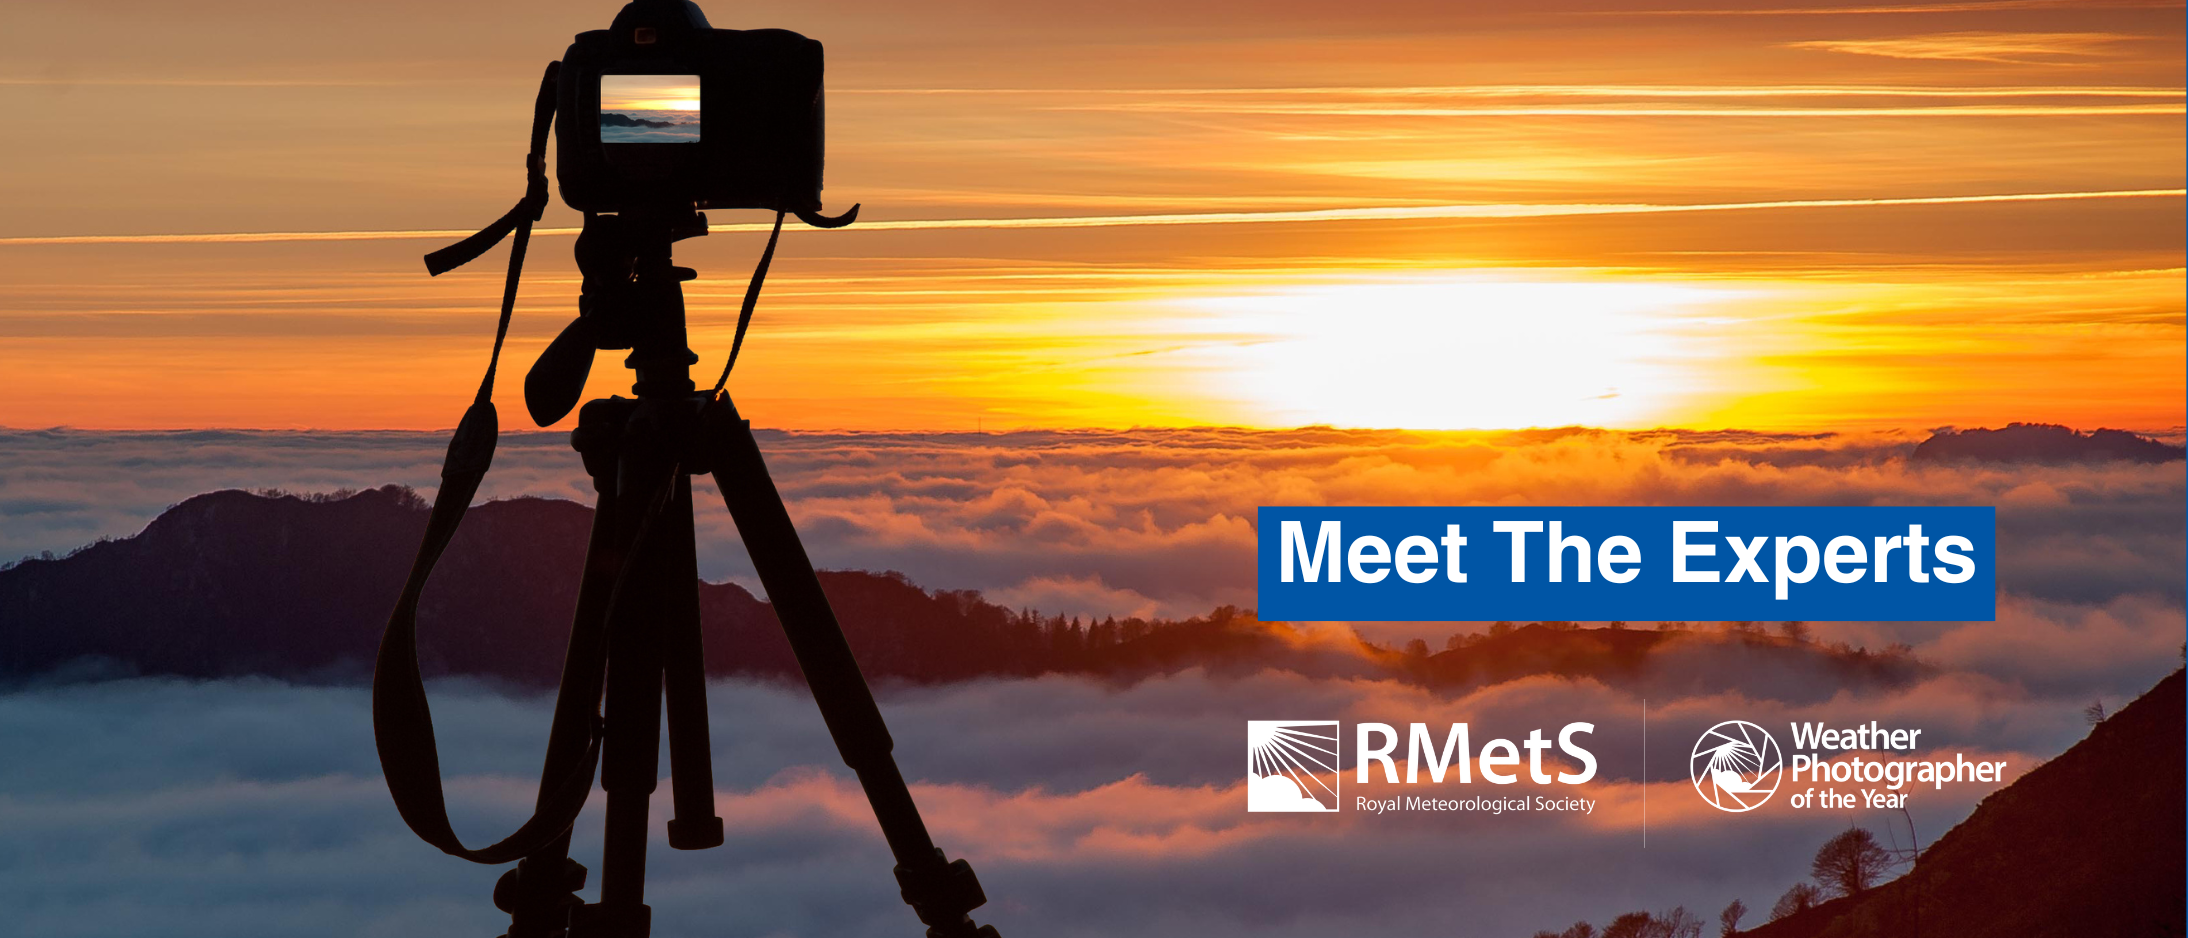 A sunset above the clouds with a camera on a tripod silhouetted in the foreground with the text Meet the Experts and the competition logo